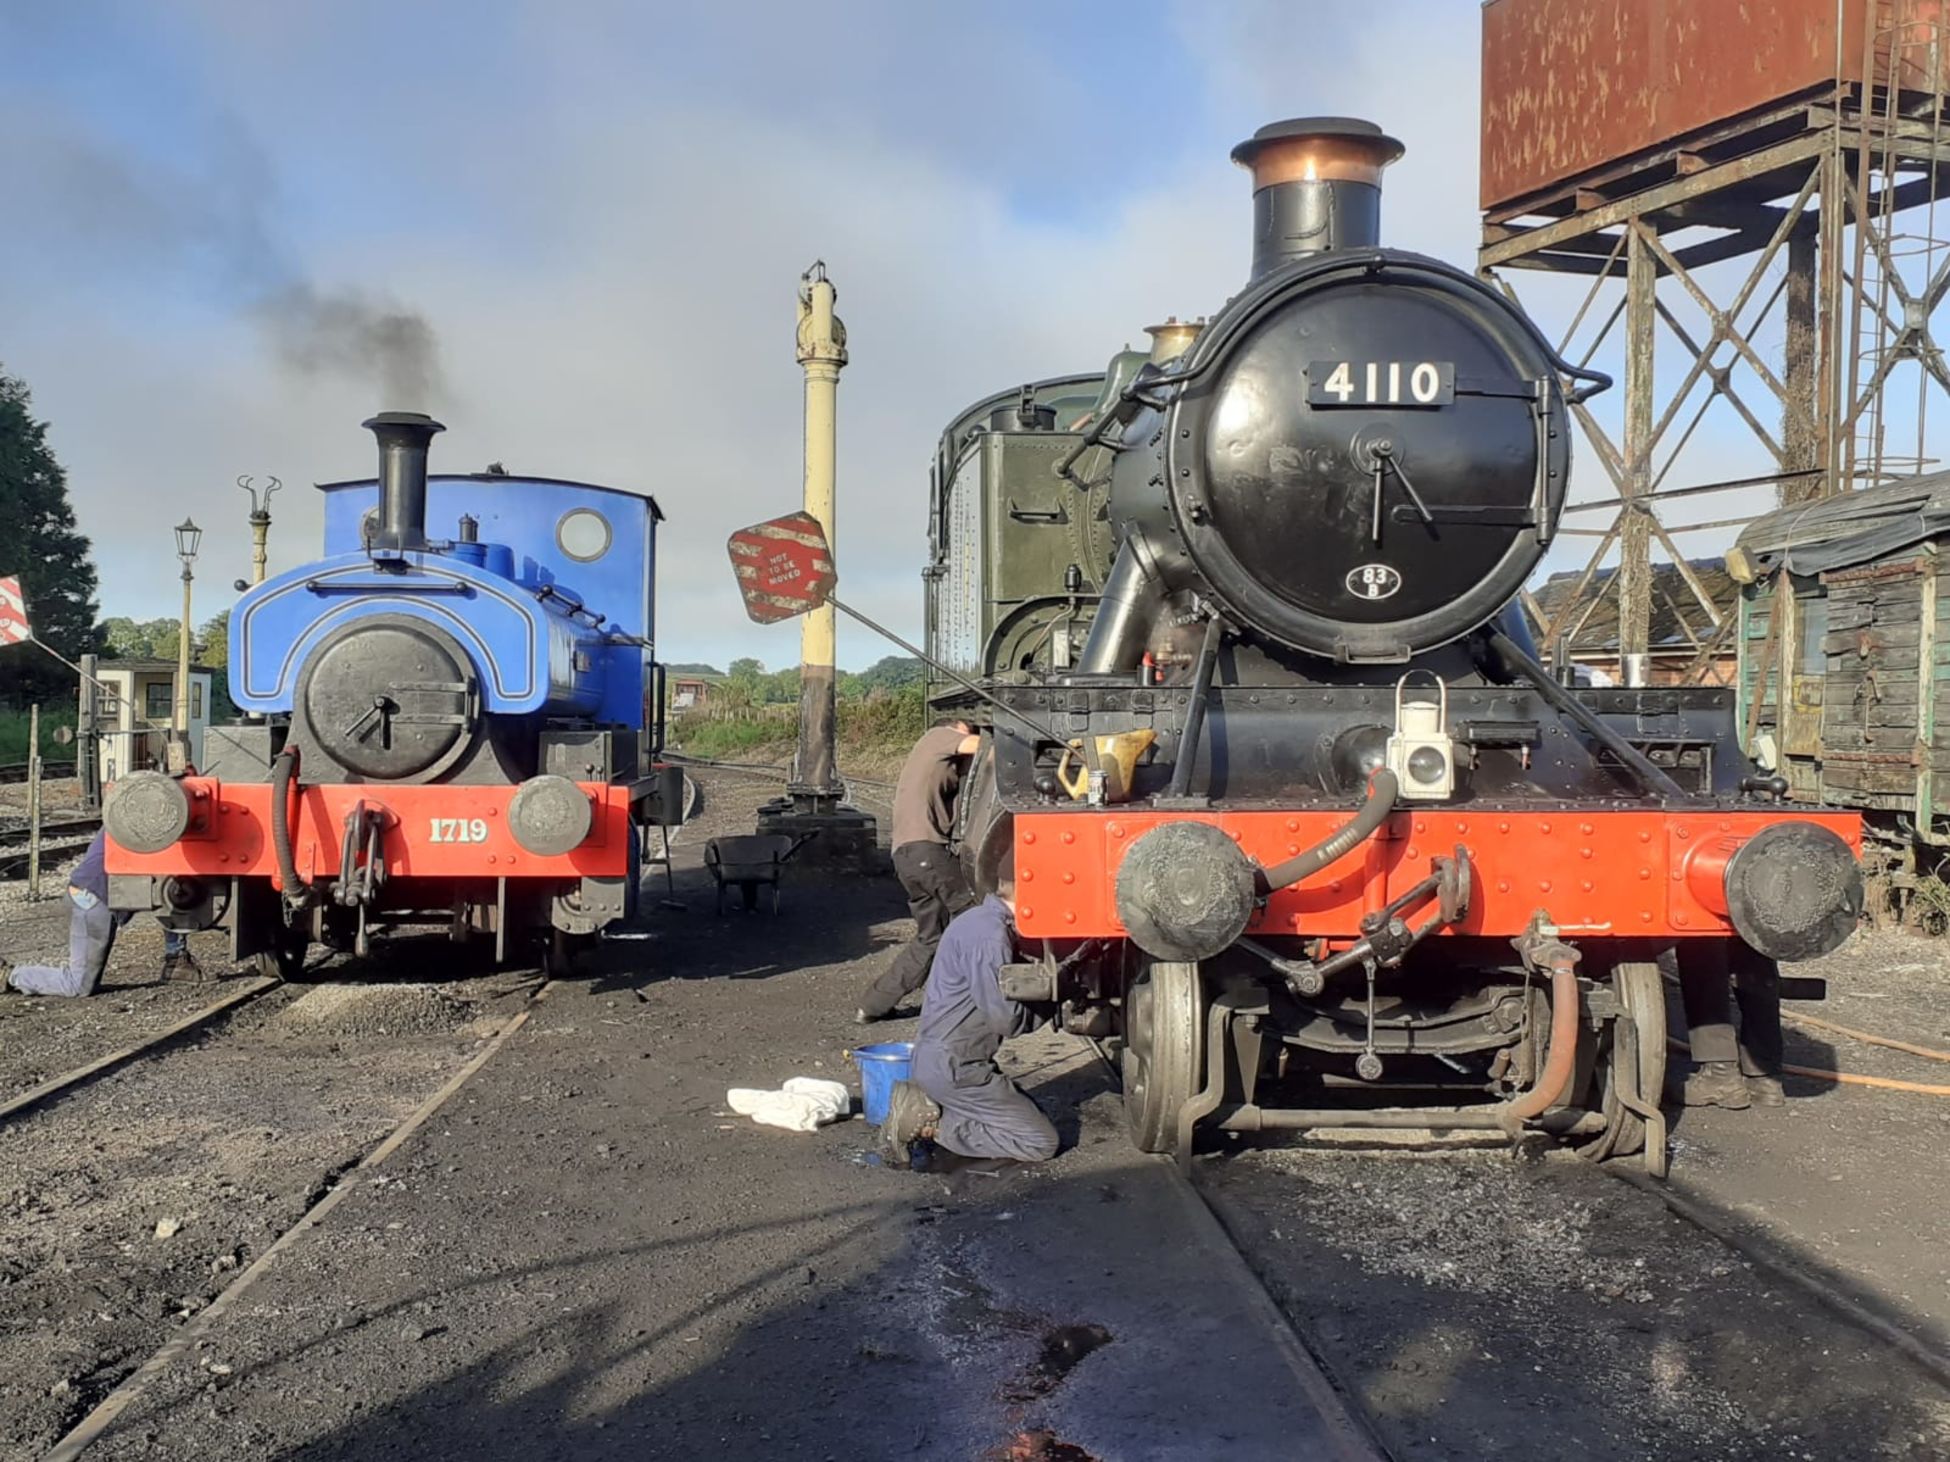 Lady Nan and 4110 engines